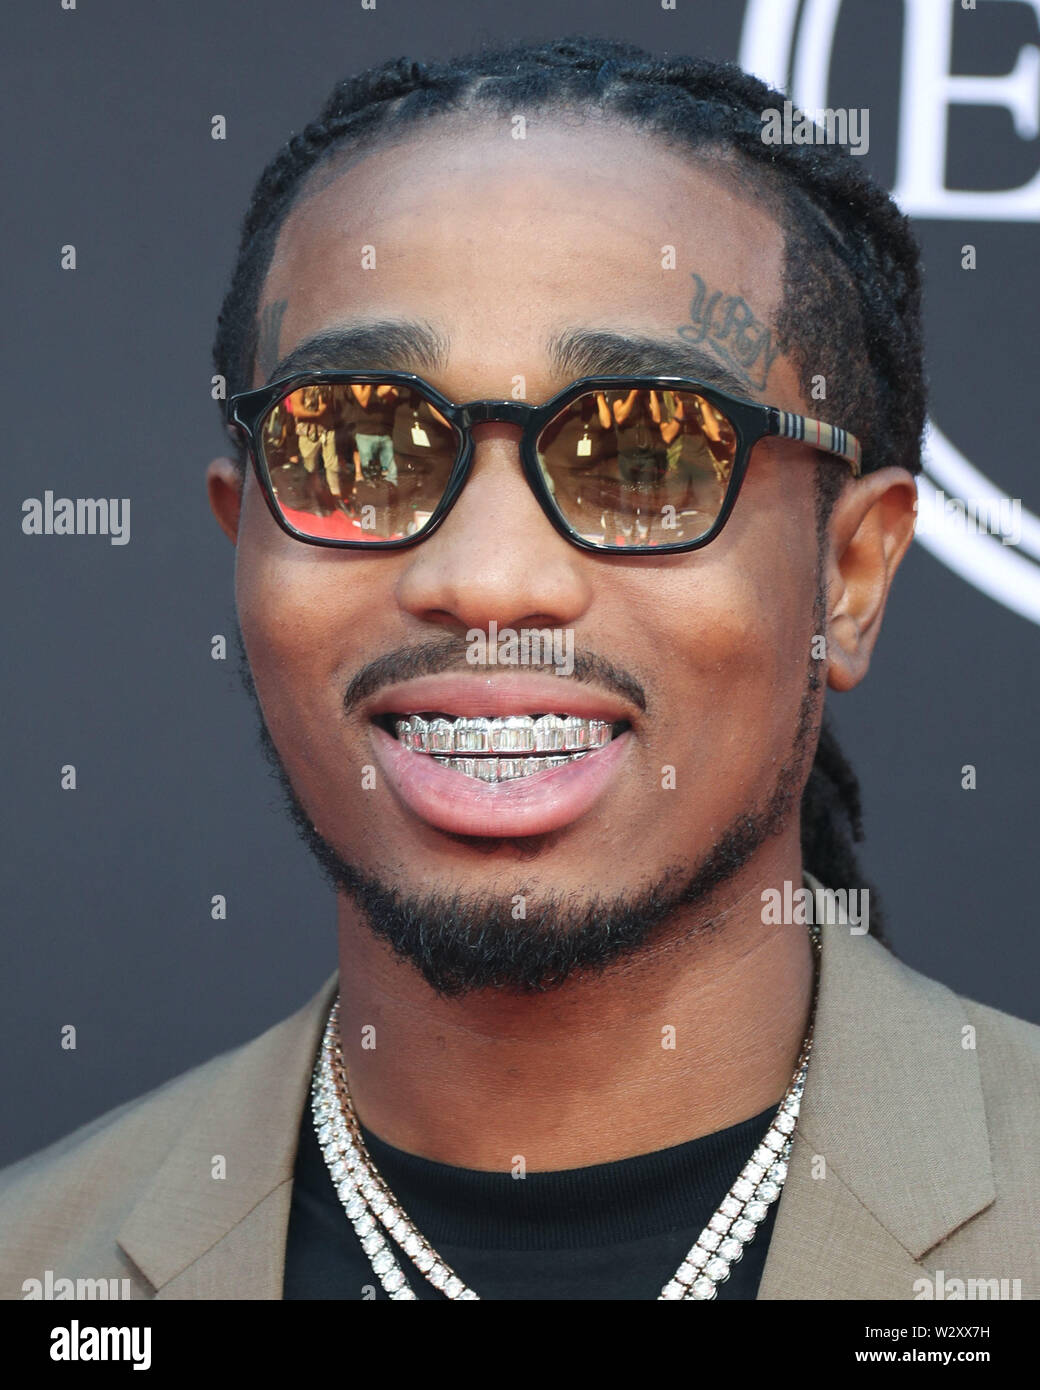 Los Angeles, California, USA. 10th July, 2019. Quavo of Migos wearing Prada  arrives at the 2019 ESPY Awards held at Microsoft Theater L.A. Live on July  10, 2019 in Los Angeles, California,